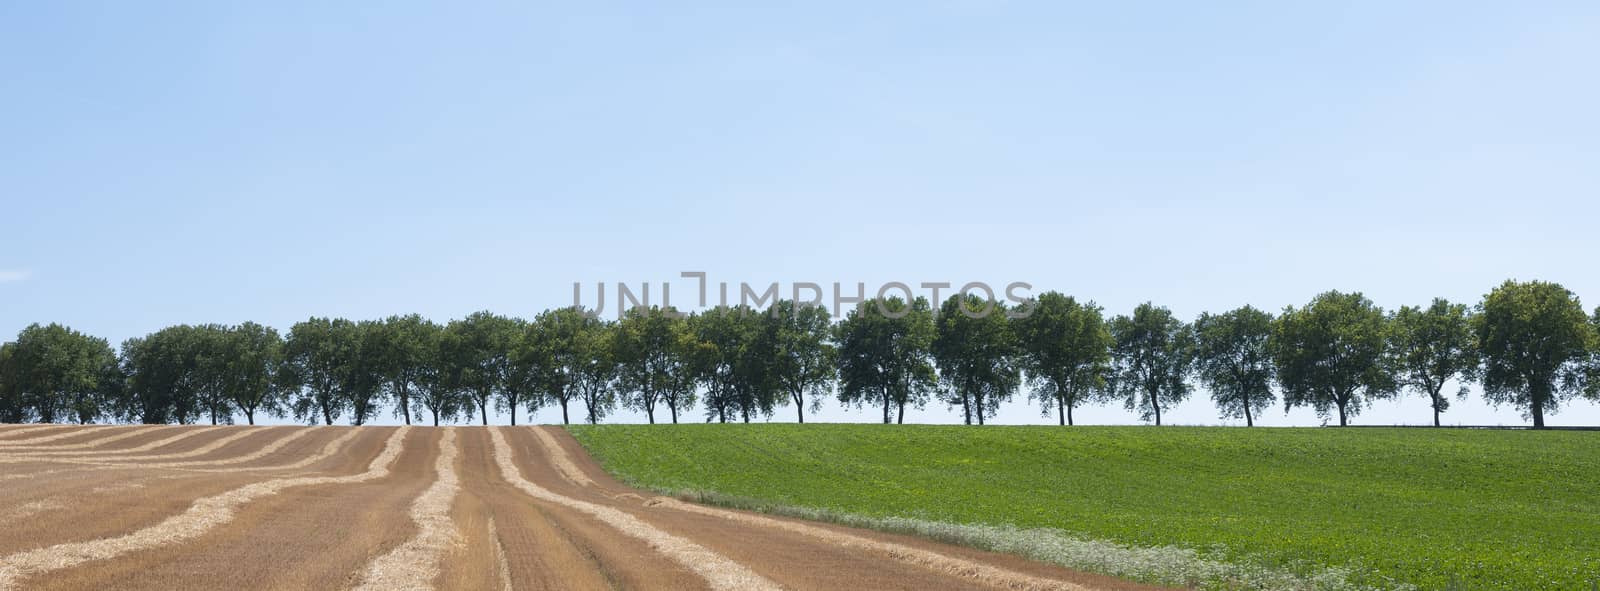 rural countryside landscape with trees and fields in nord pas de calais in france